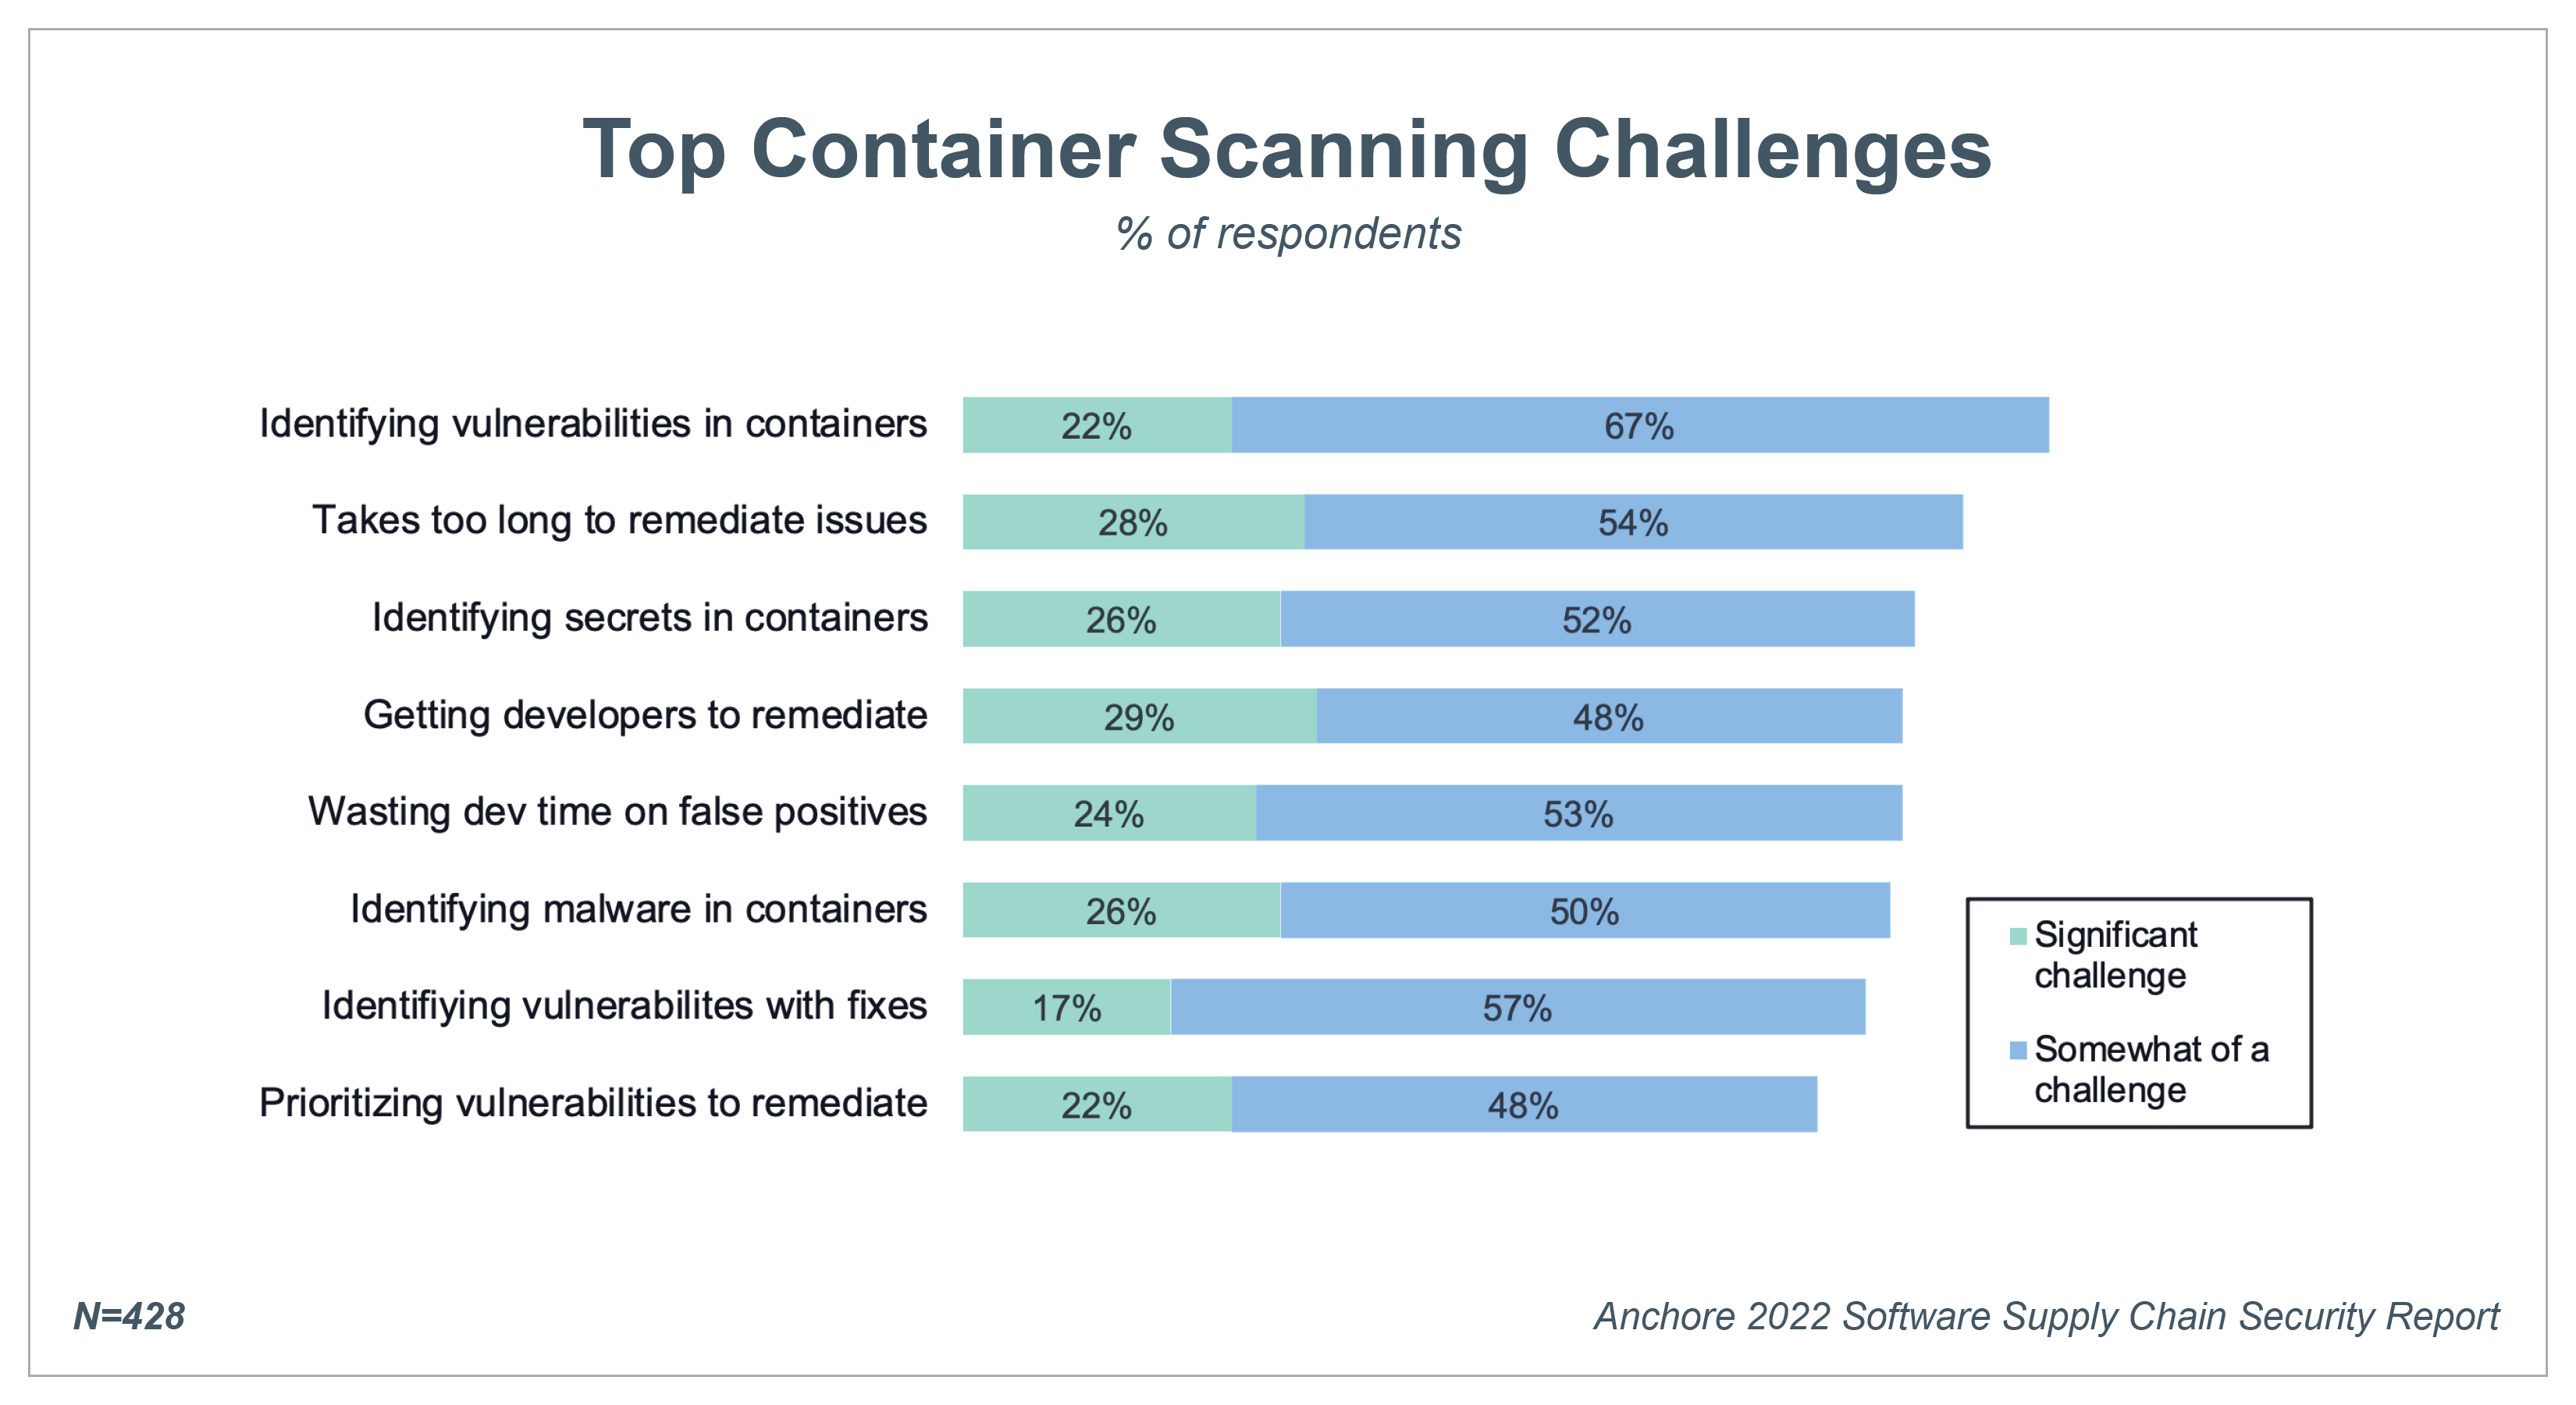 Bar chart showing top container scanning challenges